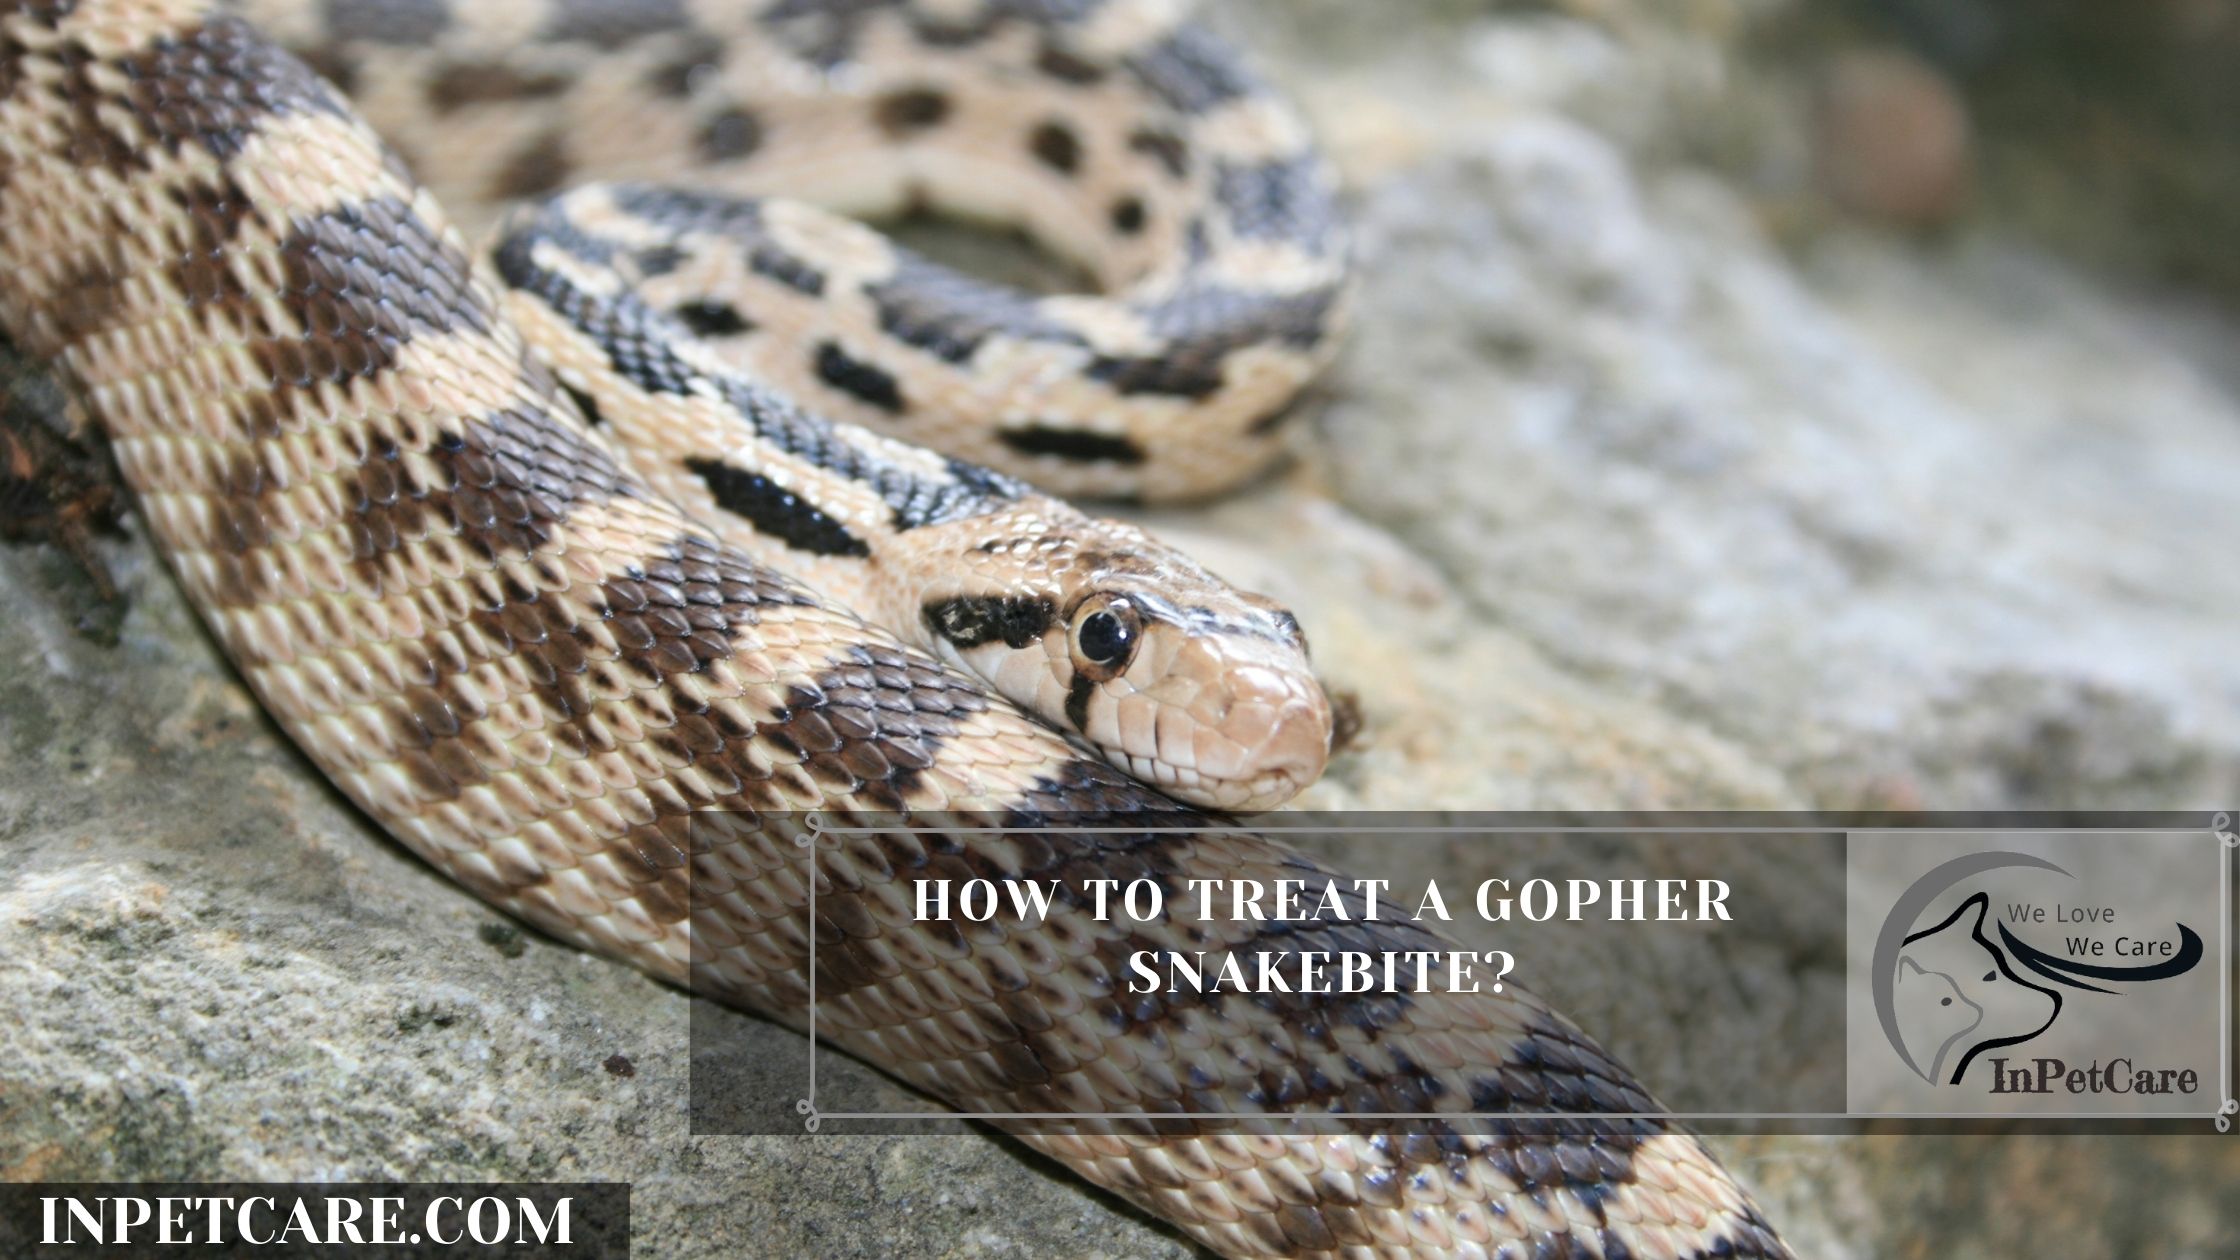 How To Treat A Gopher Snakebite?